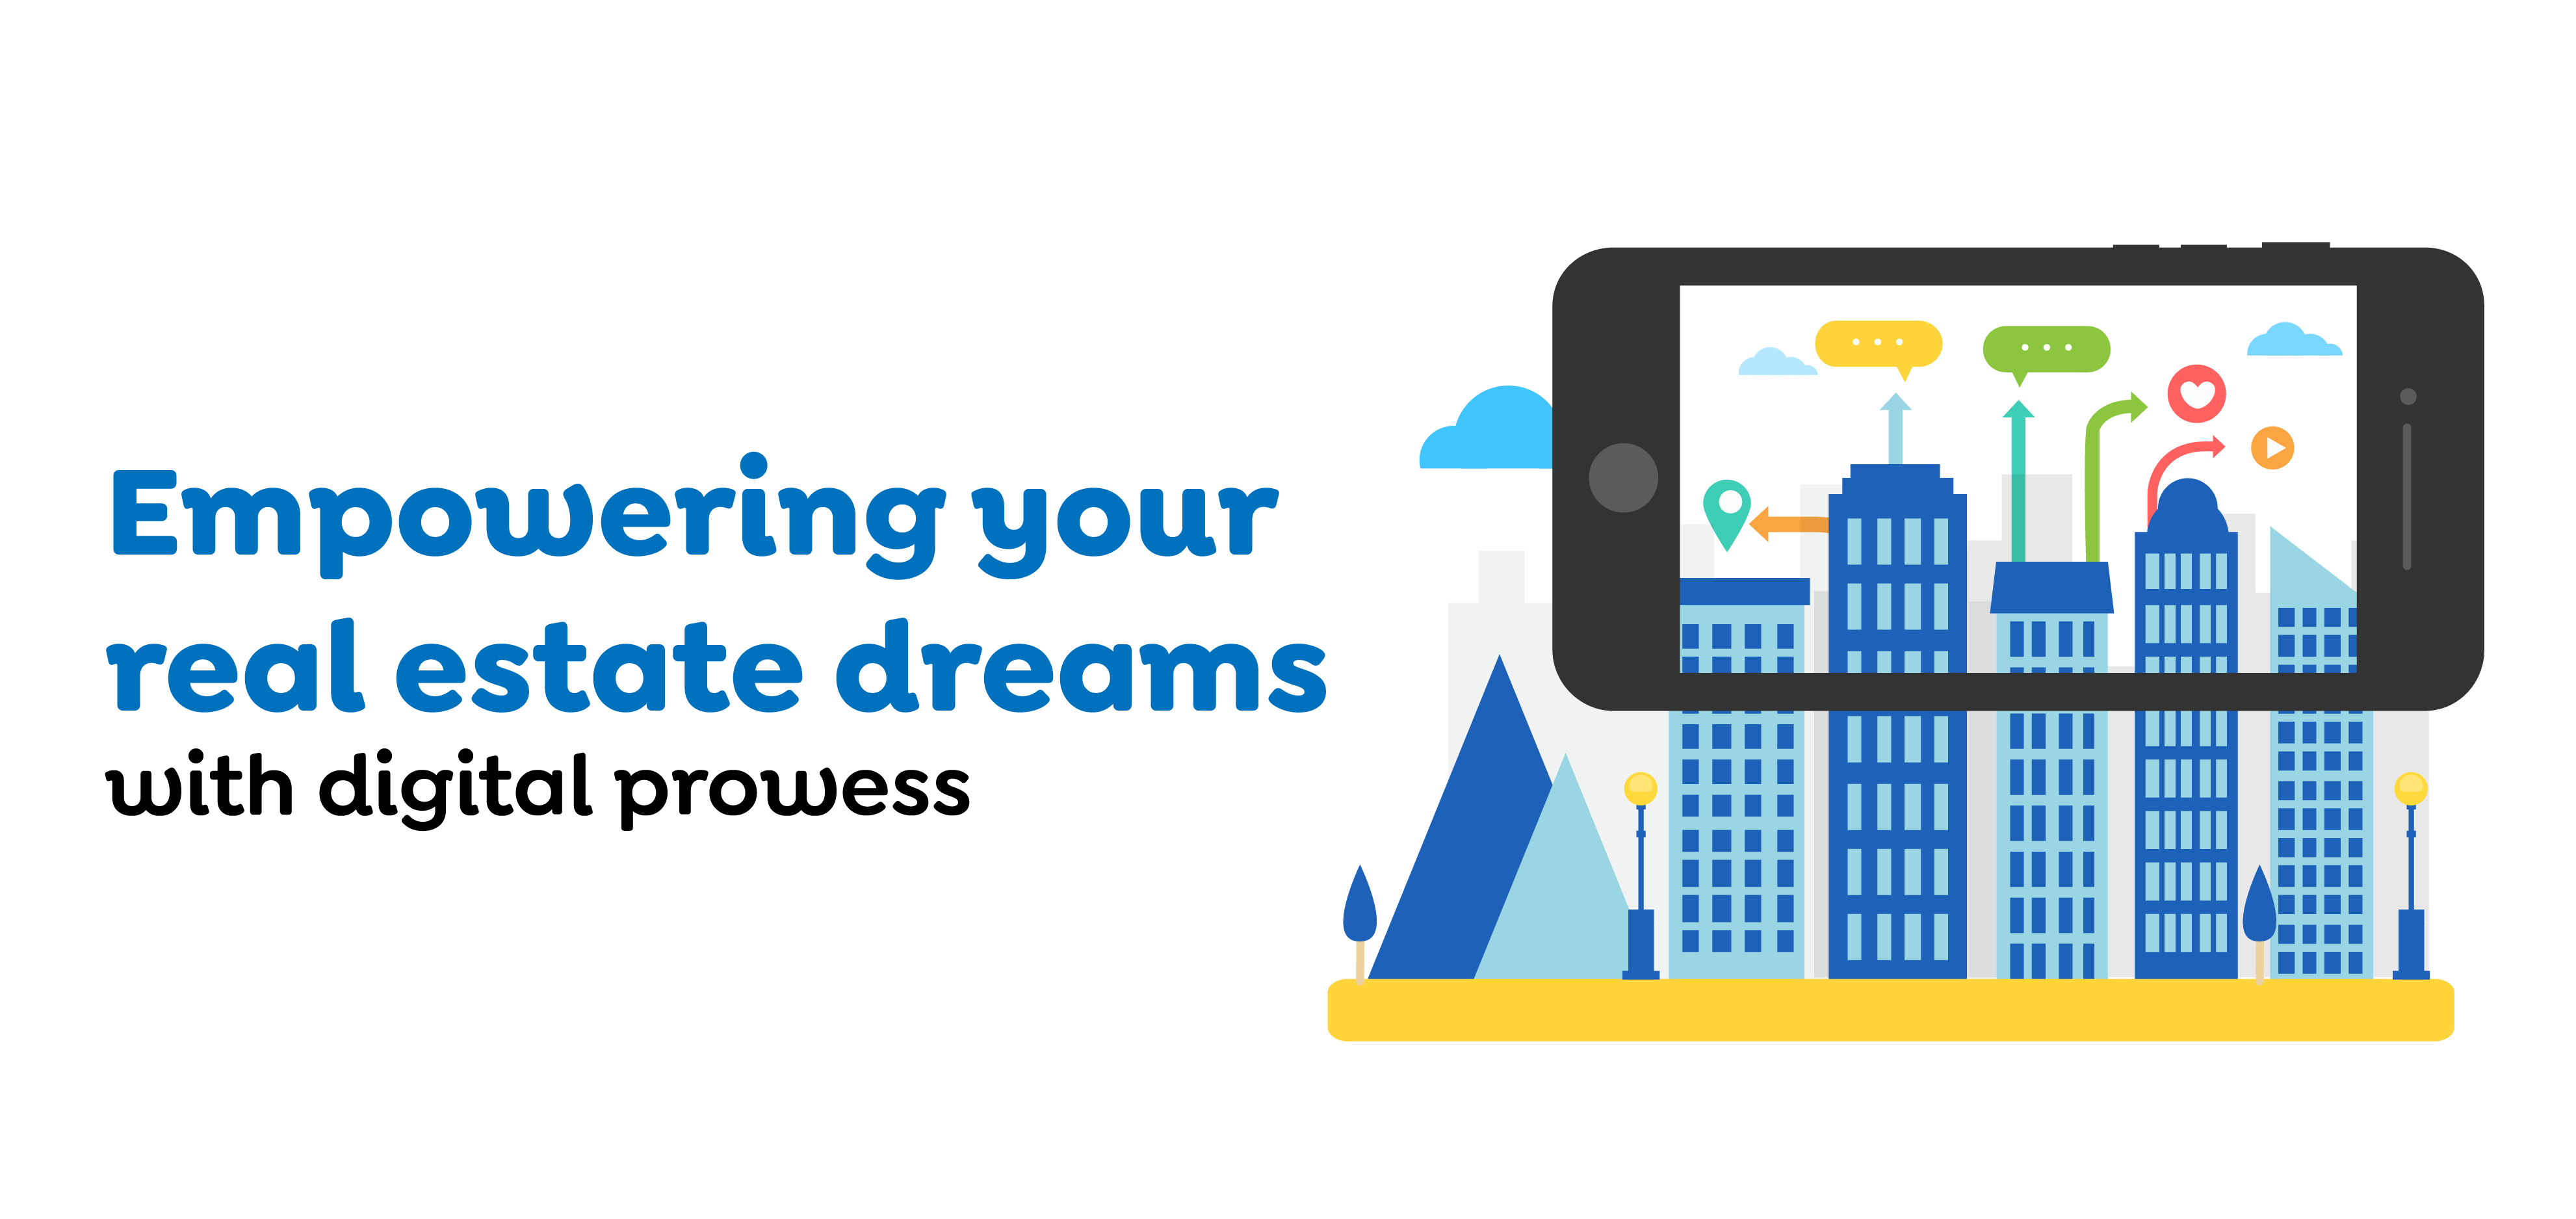 Empowering your real estate dreams with digital prowess